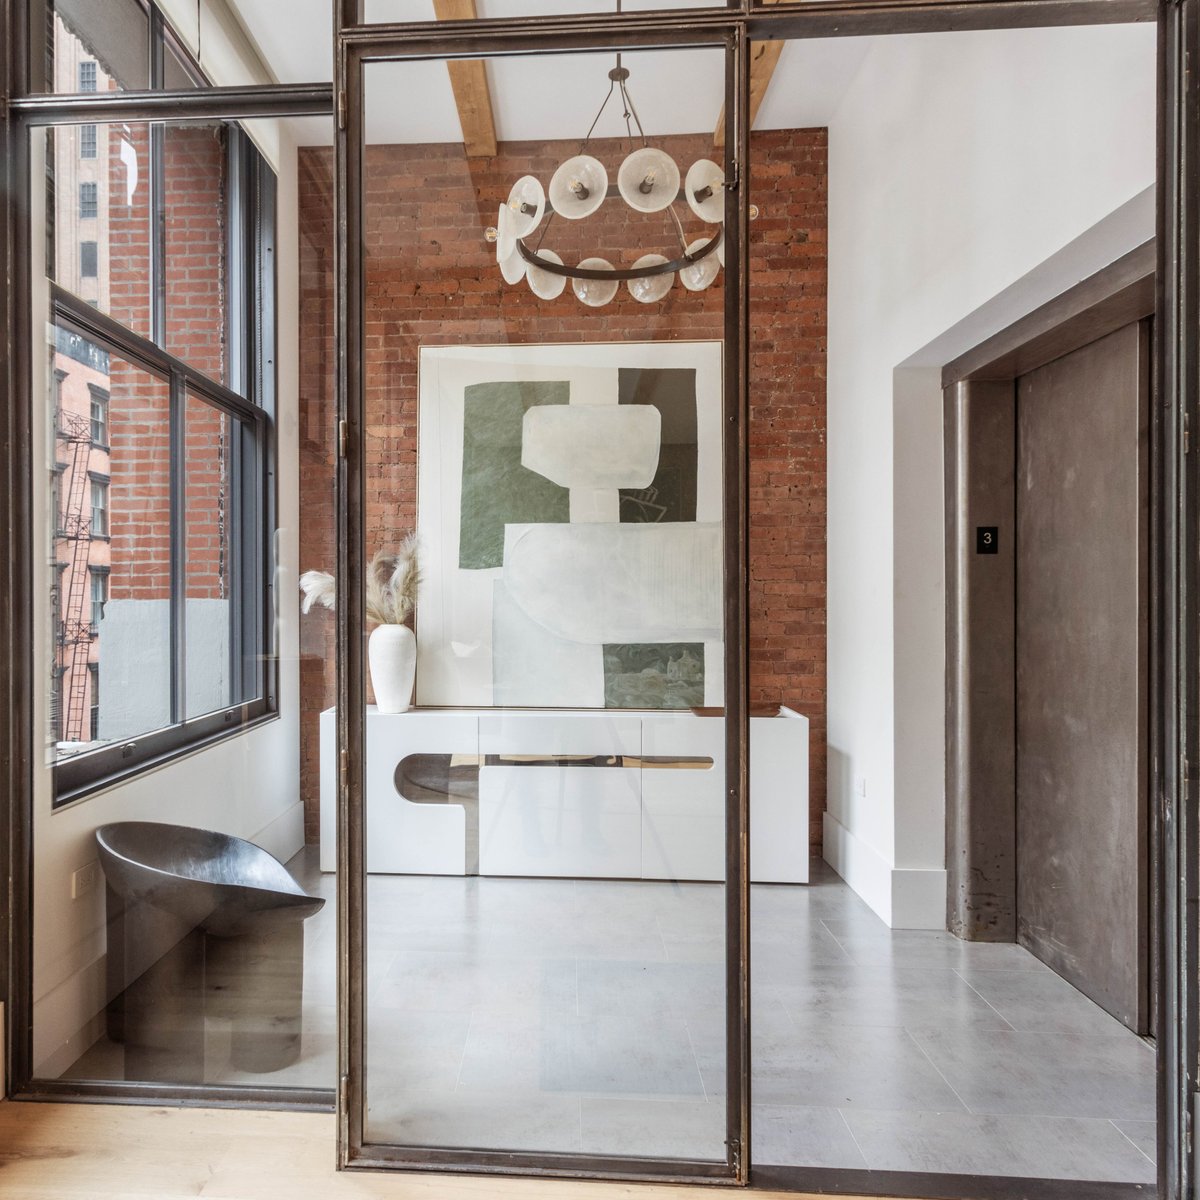 The blackened steel and glass foyer wall in our gut renovated Tribeca Loft beautifully fabricated by Parke Macdowell adds a modern touch to the space. #ZHarchitects #Architecture #Moderndesign #highendresidential #NYC #TribecaLoft #renovation #interiordesign 🏙️🛠️